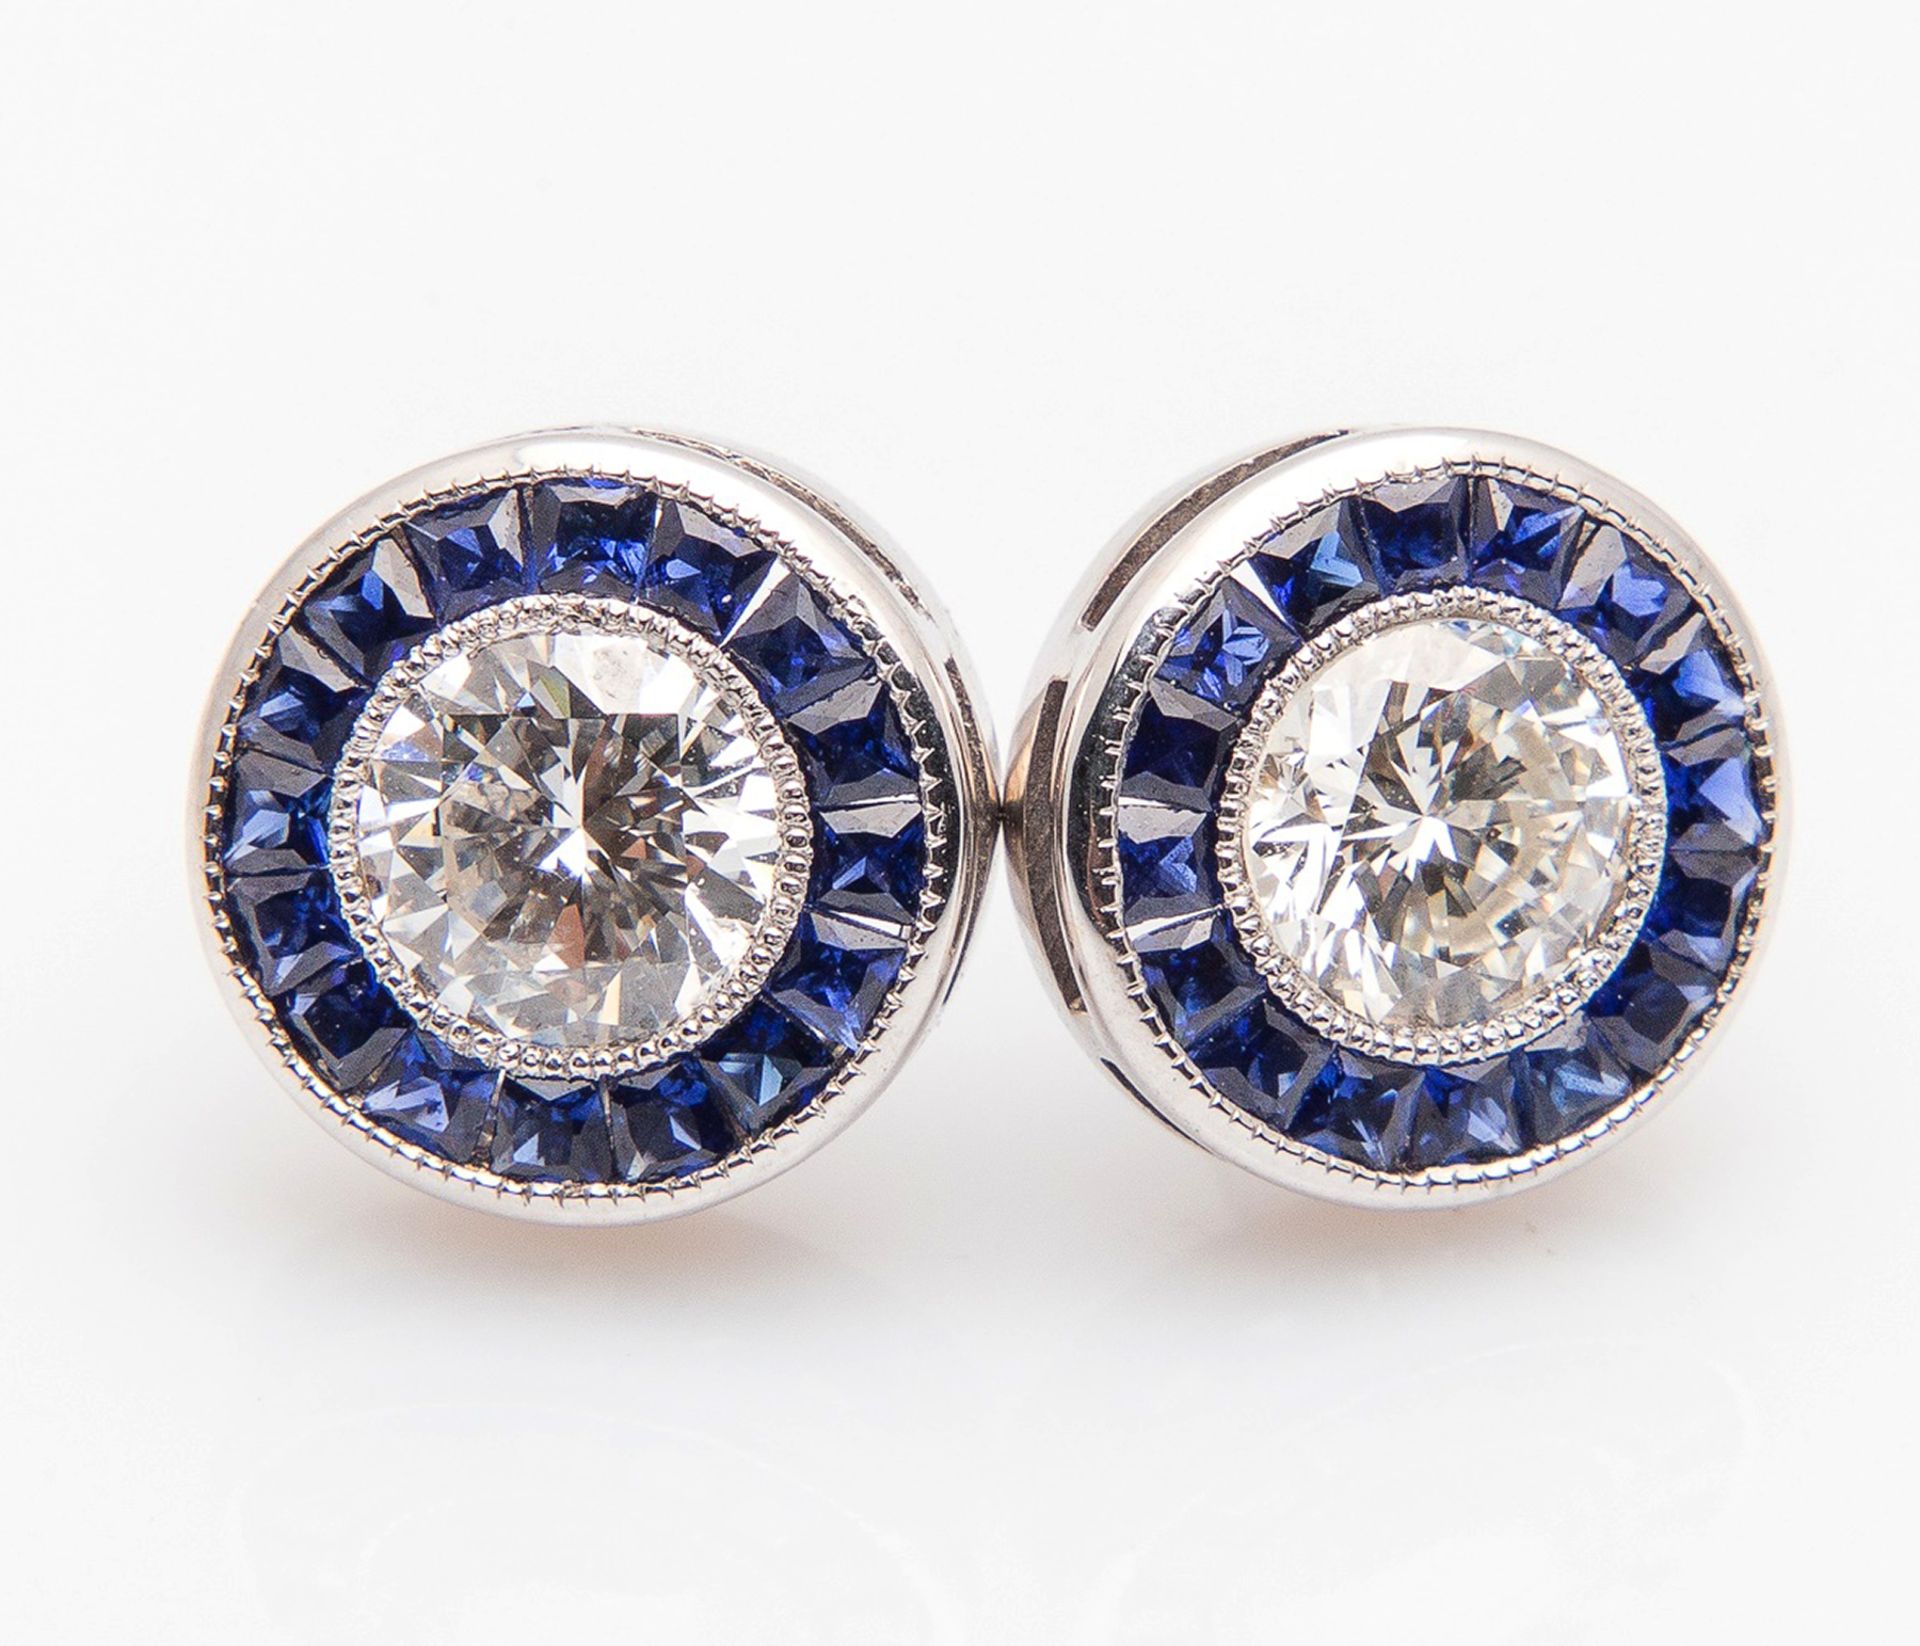 Elegant 1920s earrings with two 0.50 ct Diamonds each edged with sapphires, very good purity and col - Image 5 of 9